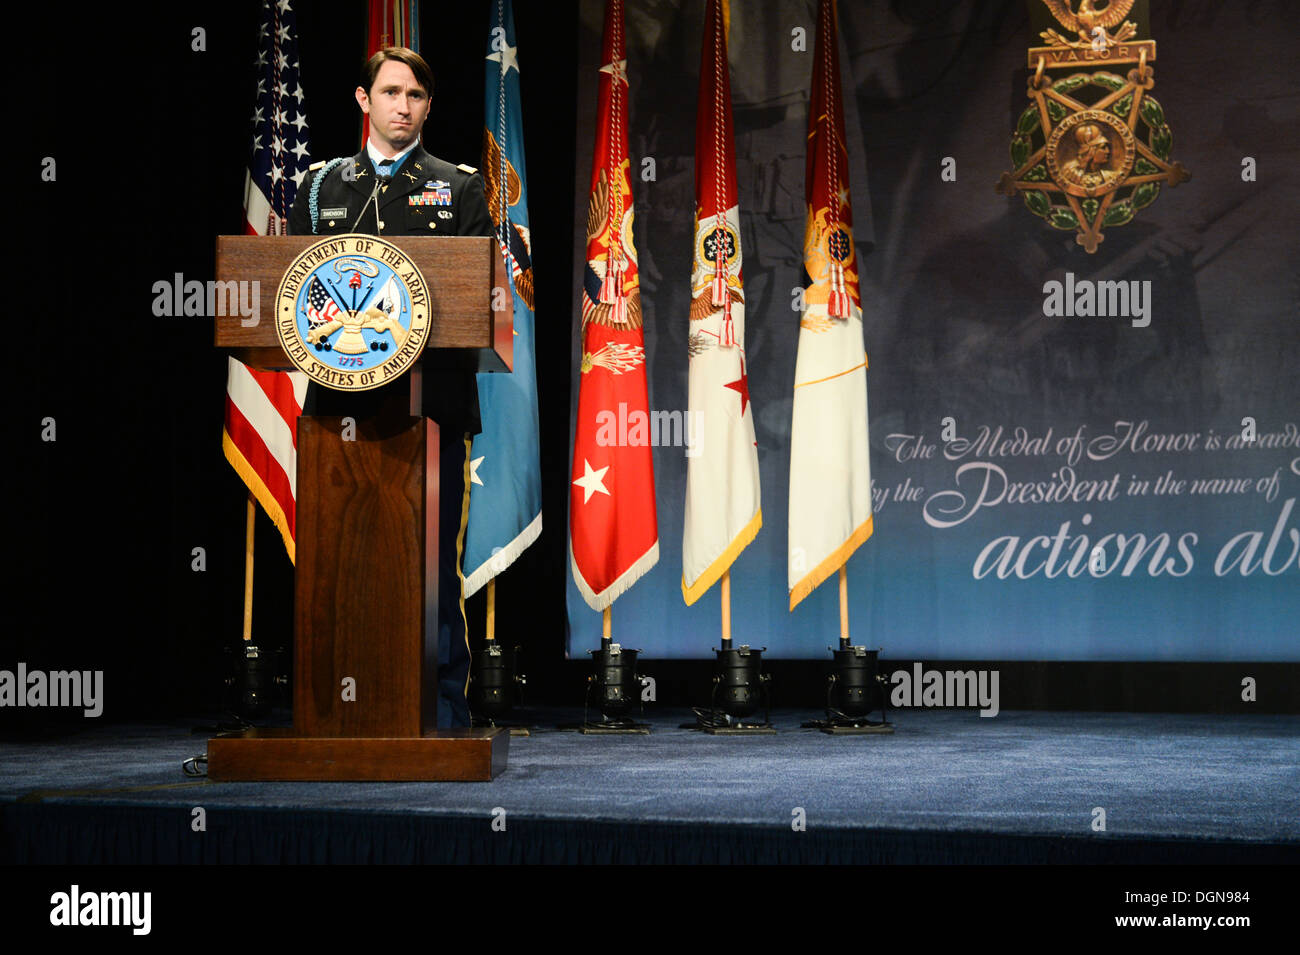 Former U.S. Army Capt. William D. Swenson, a Medal of Honor recipient, gives his speech at his Medal of Honor Induction at the Pentagon Auditorium in Washington, D.C., Oct 16, 2013. Stock Photo